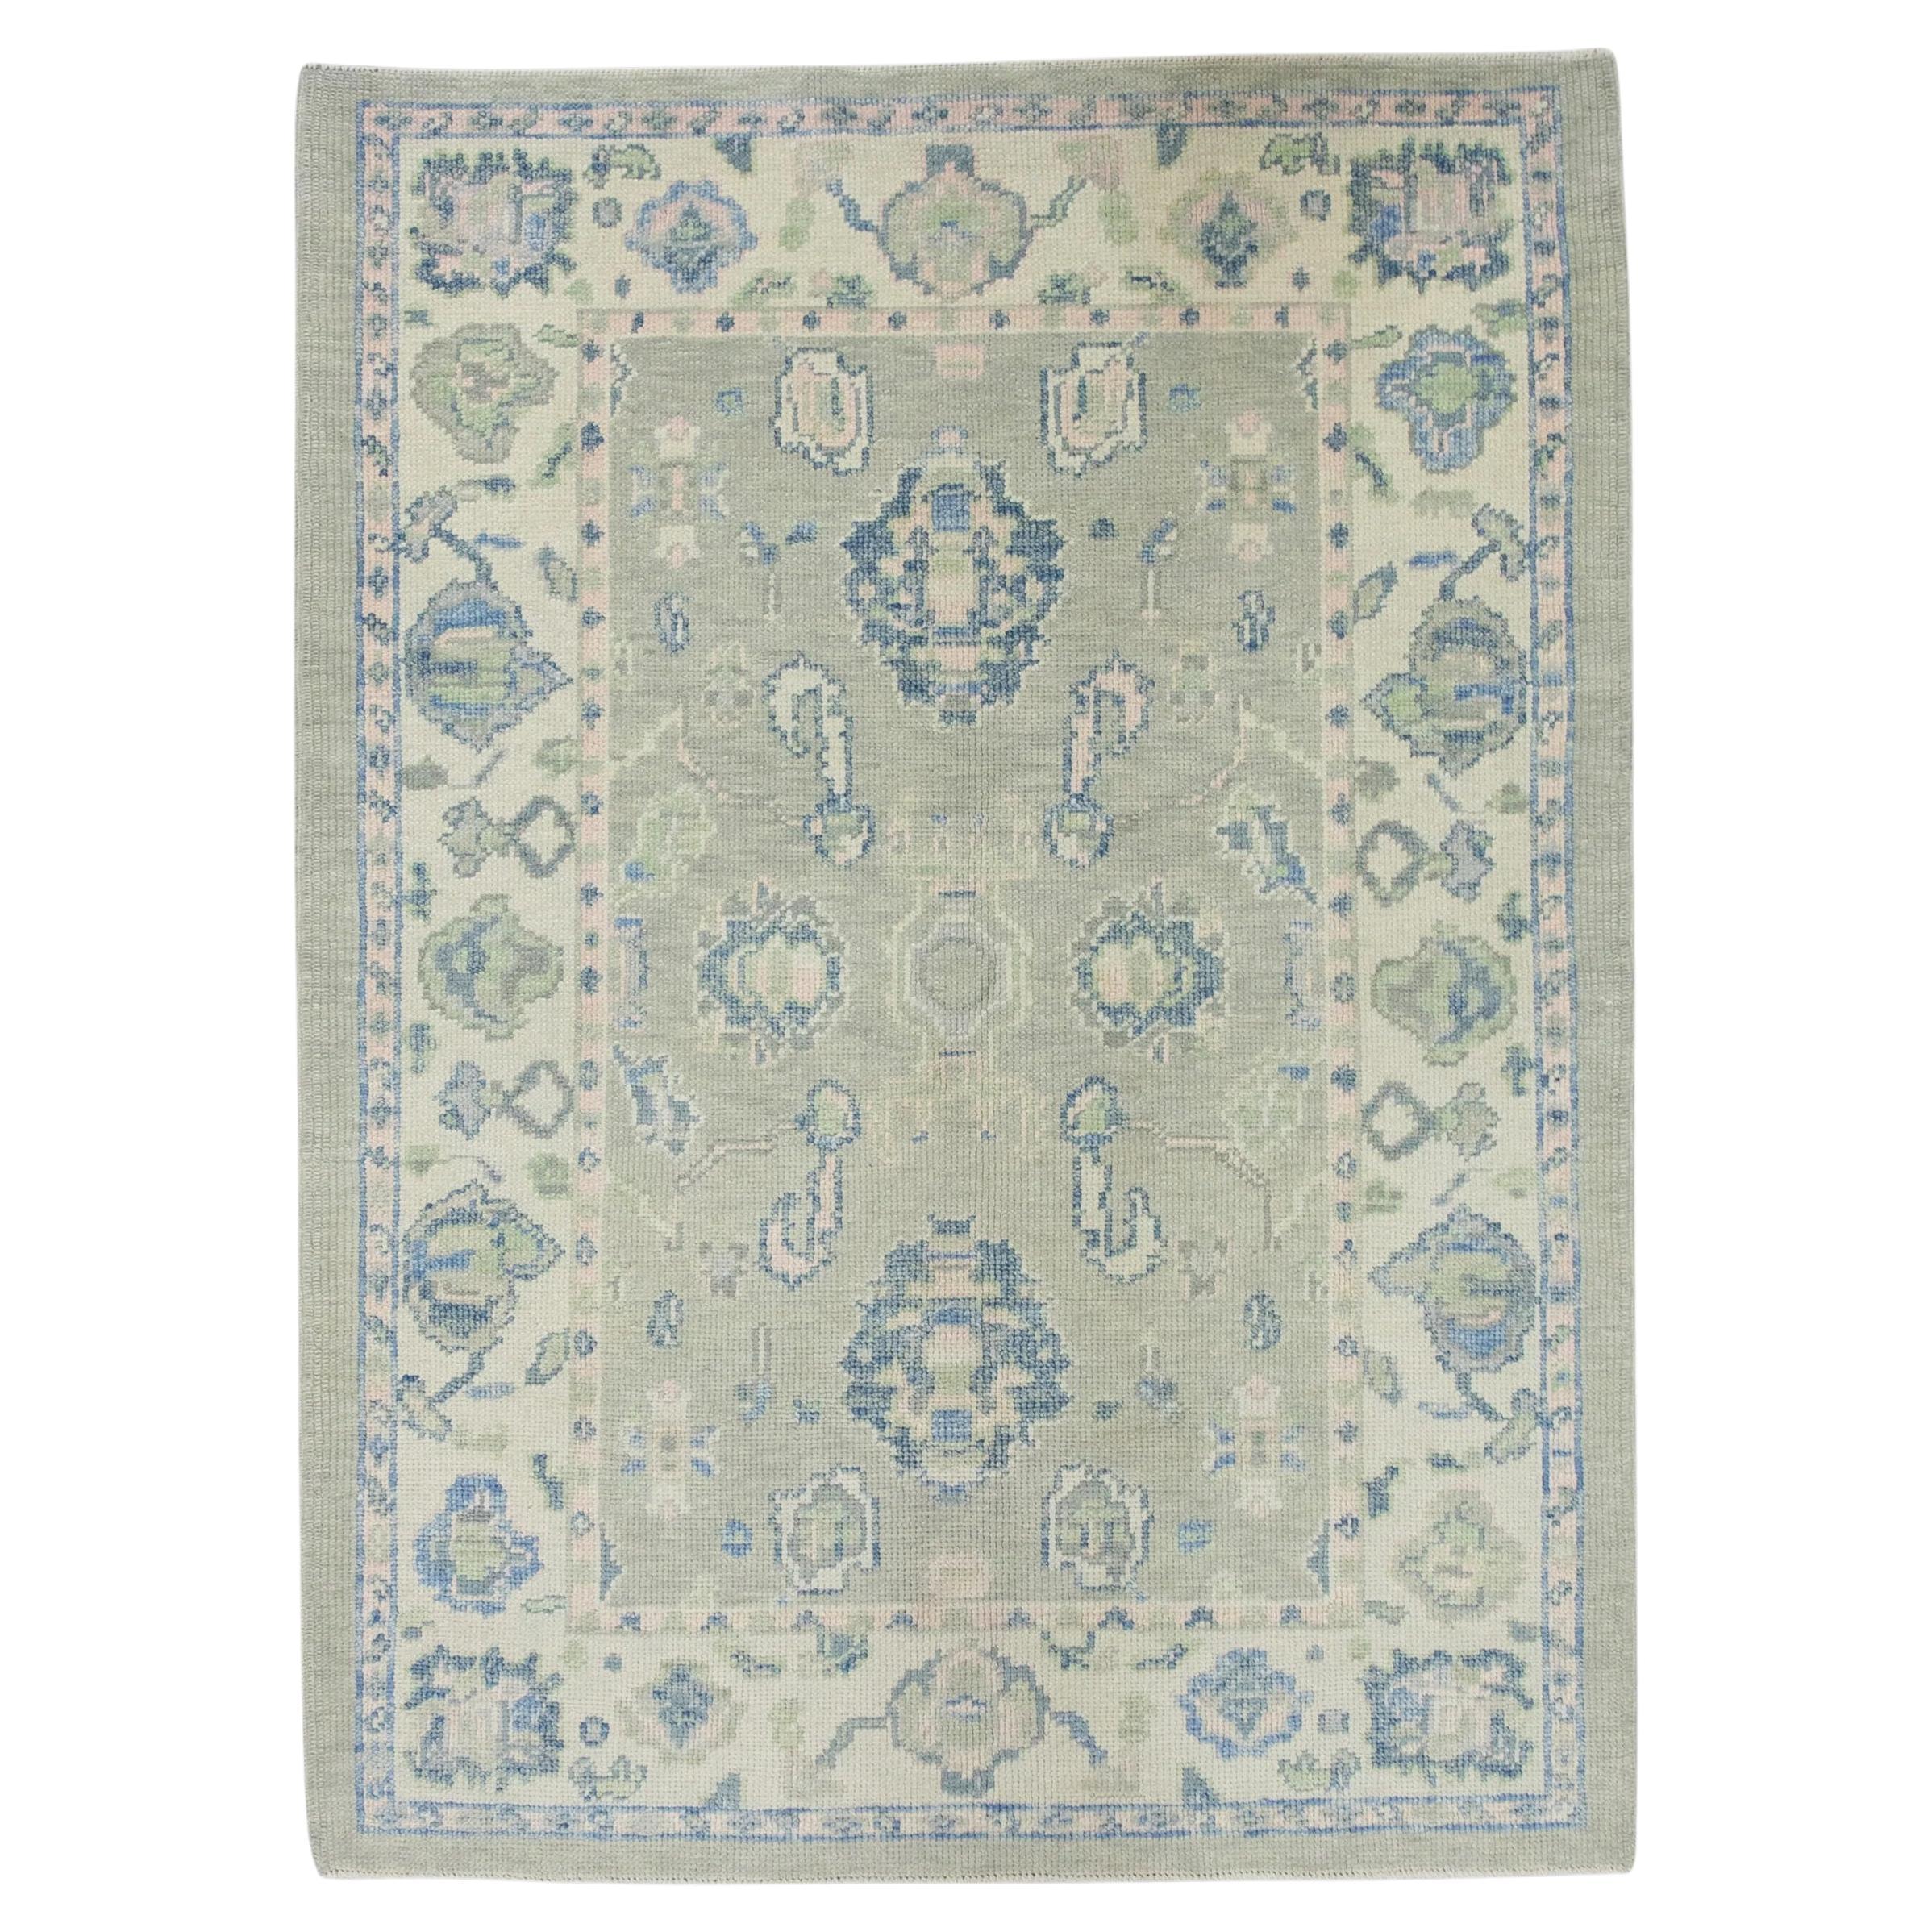 Green and Blue Handwoven Wool Turkish Oushak Rug in Floral Pattern 4' x 5'5"